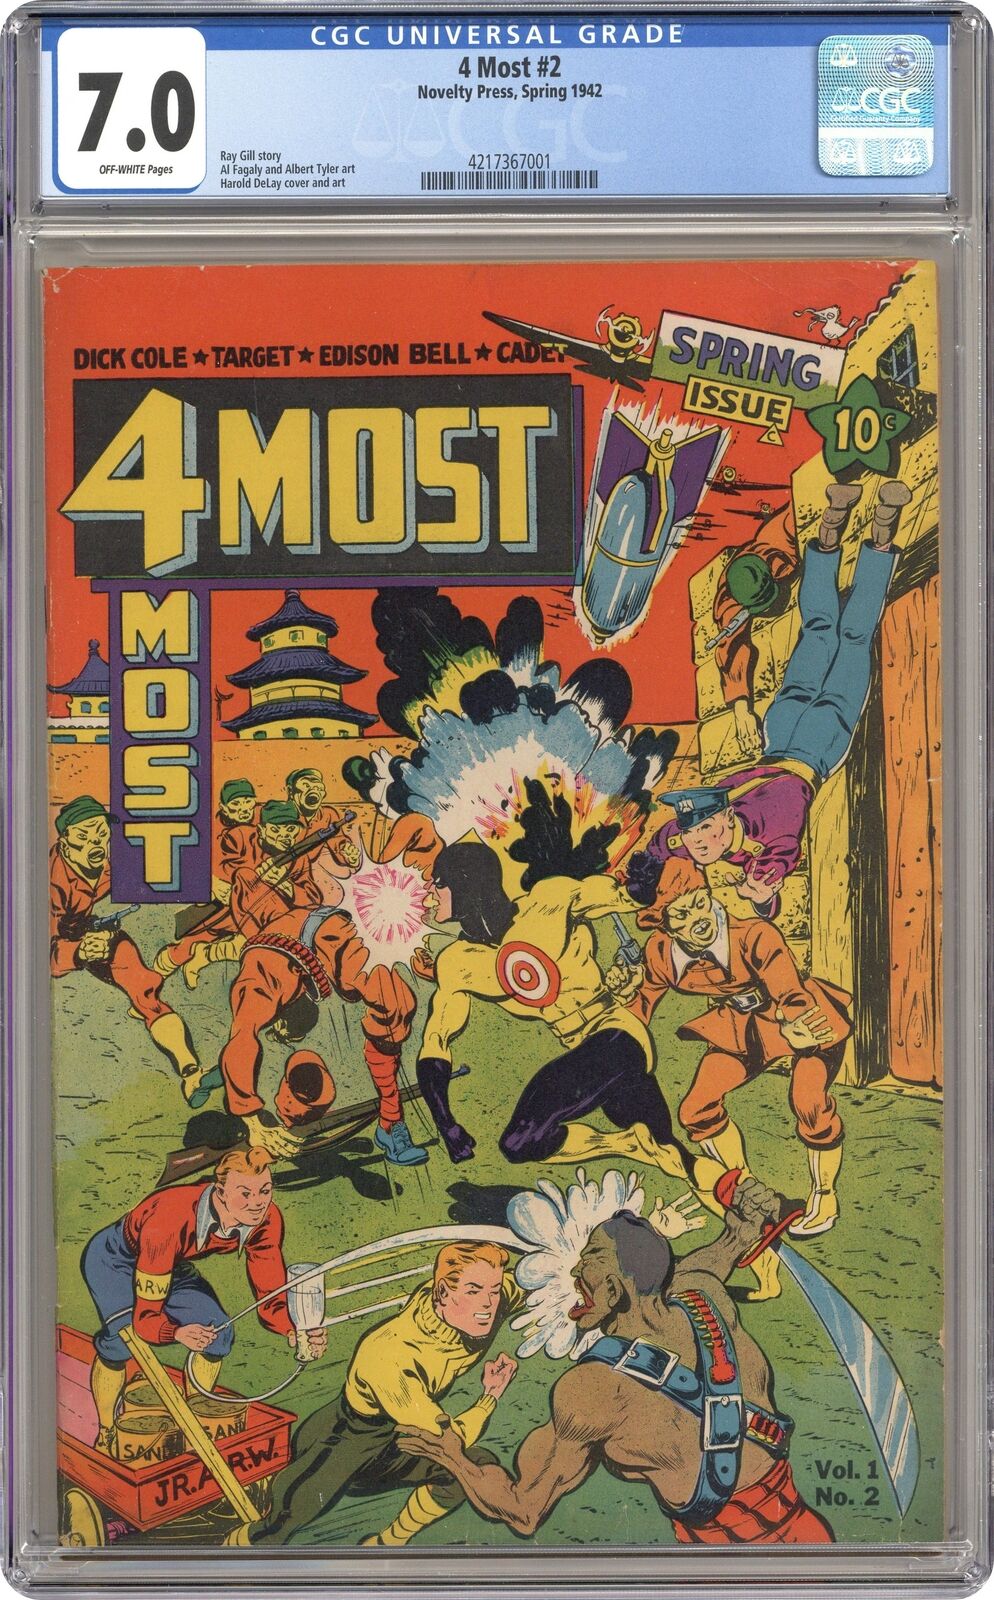 4Most Vol. 1 Four Most #2 CGC 7.0 1942 4217367001